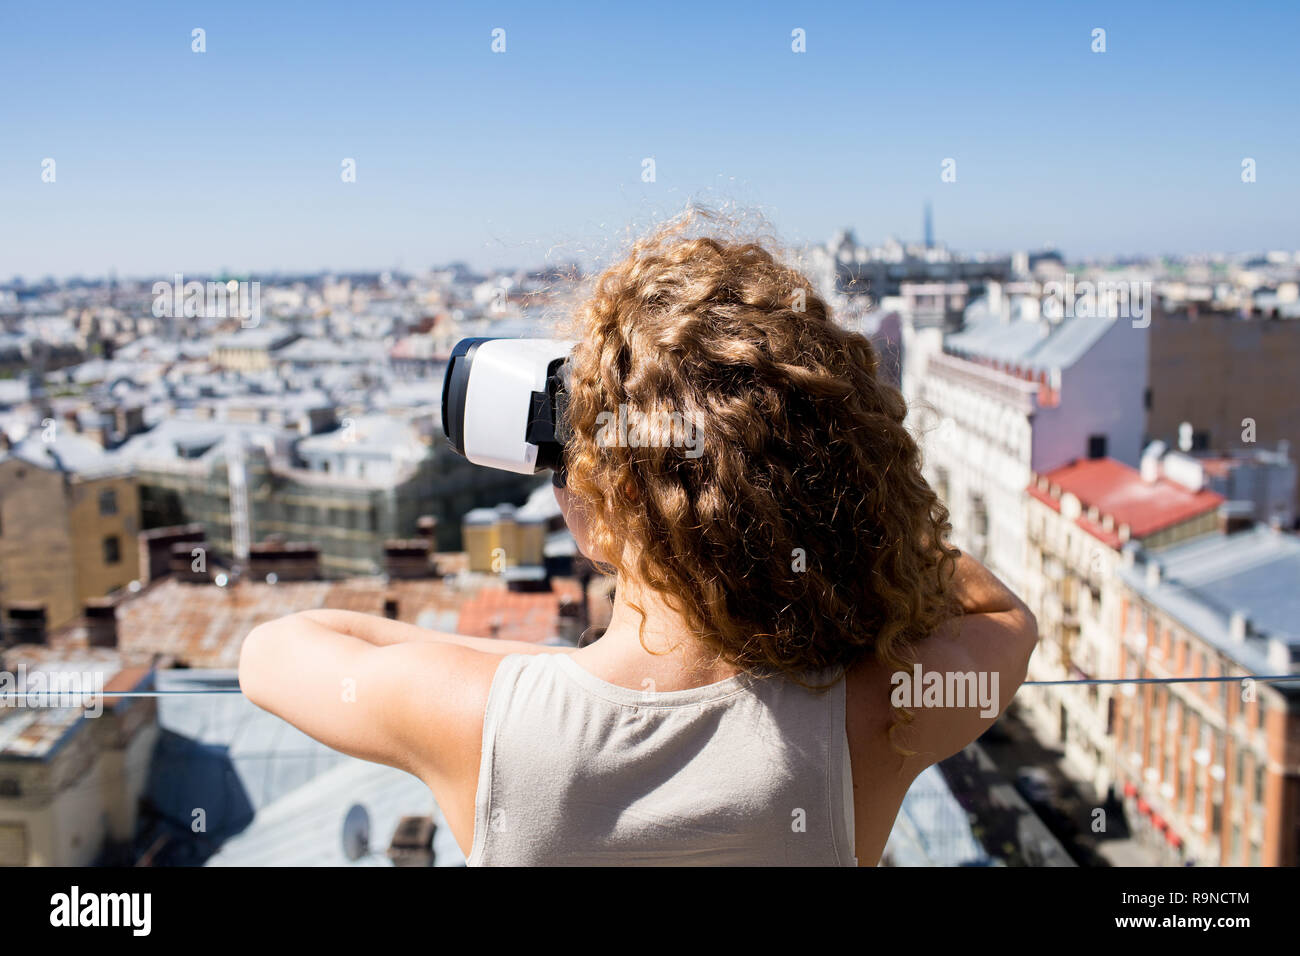 Girl with vr headset Stock Photo